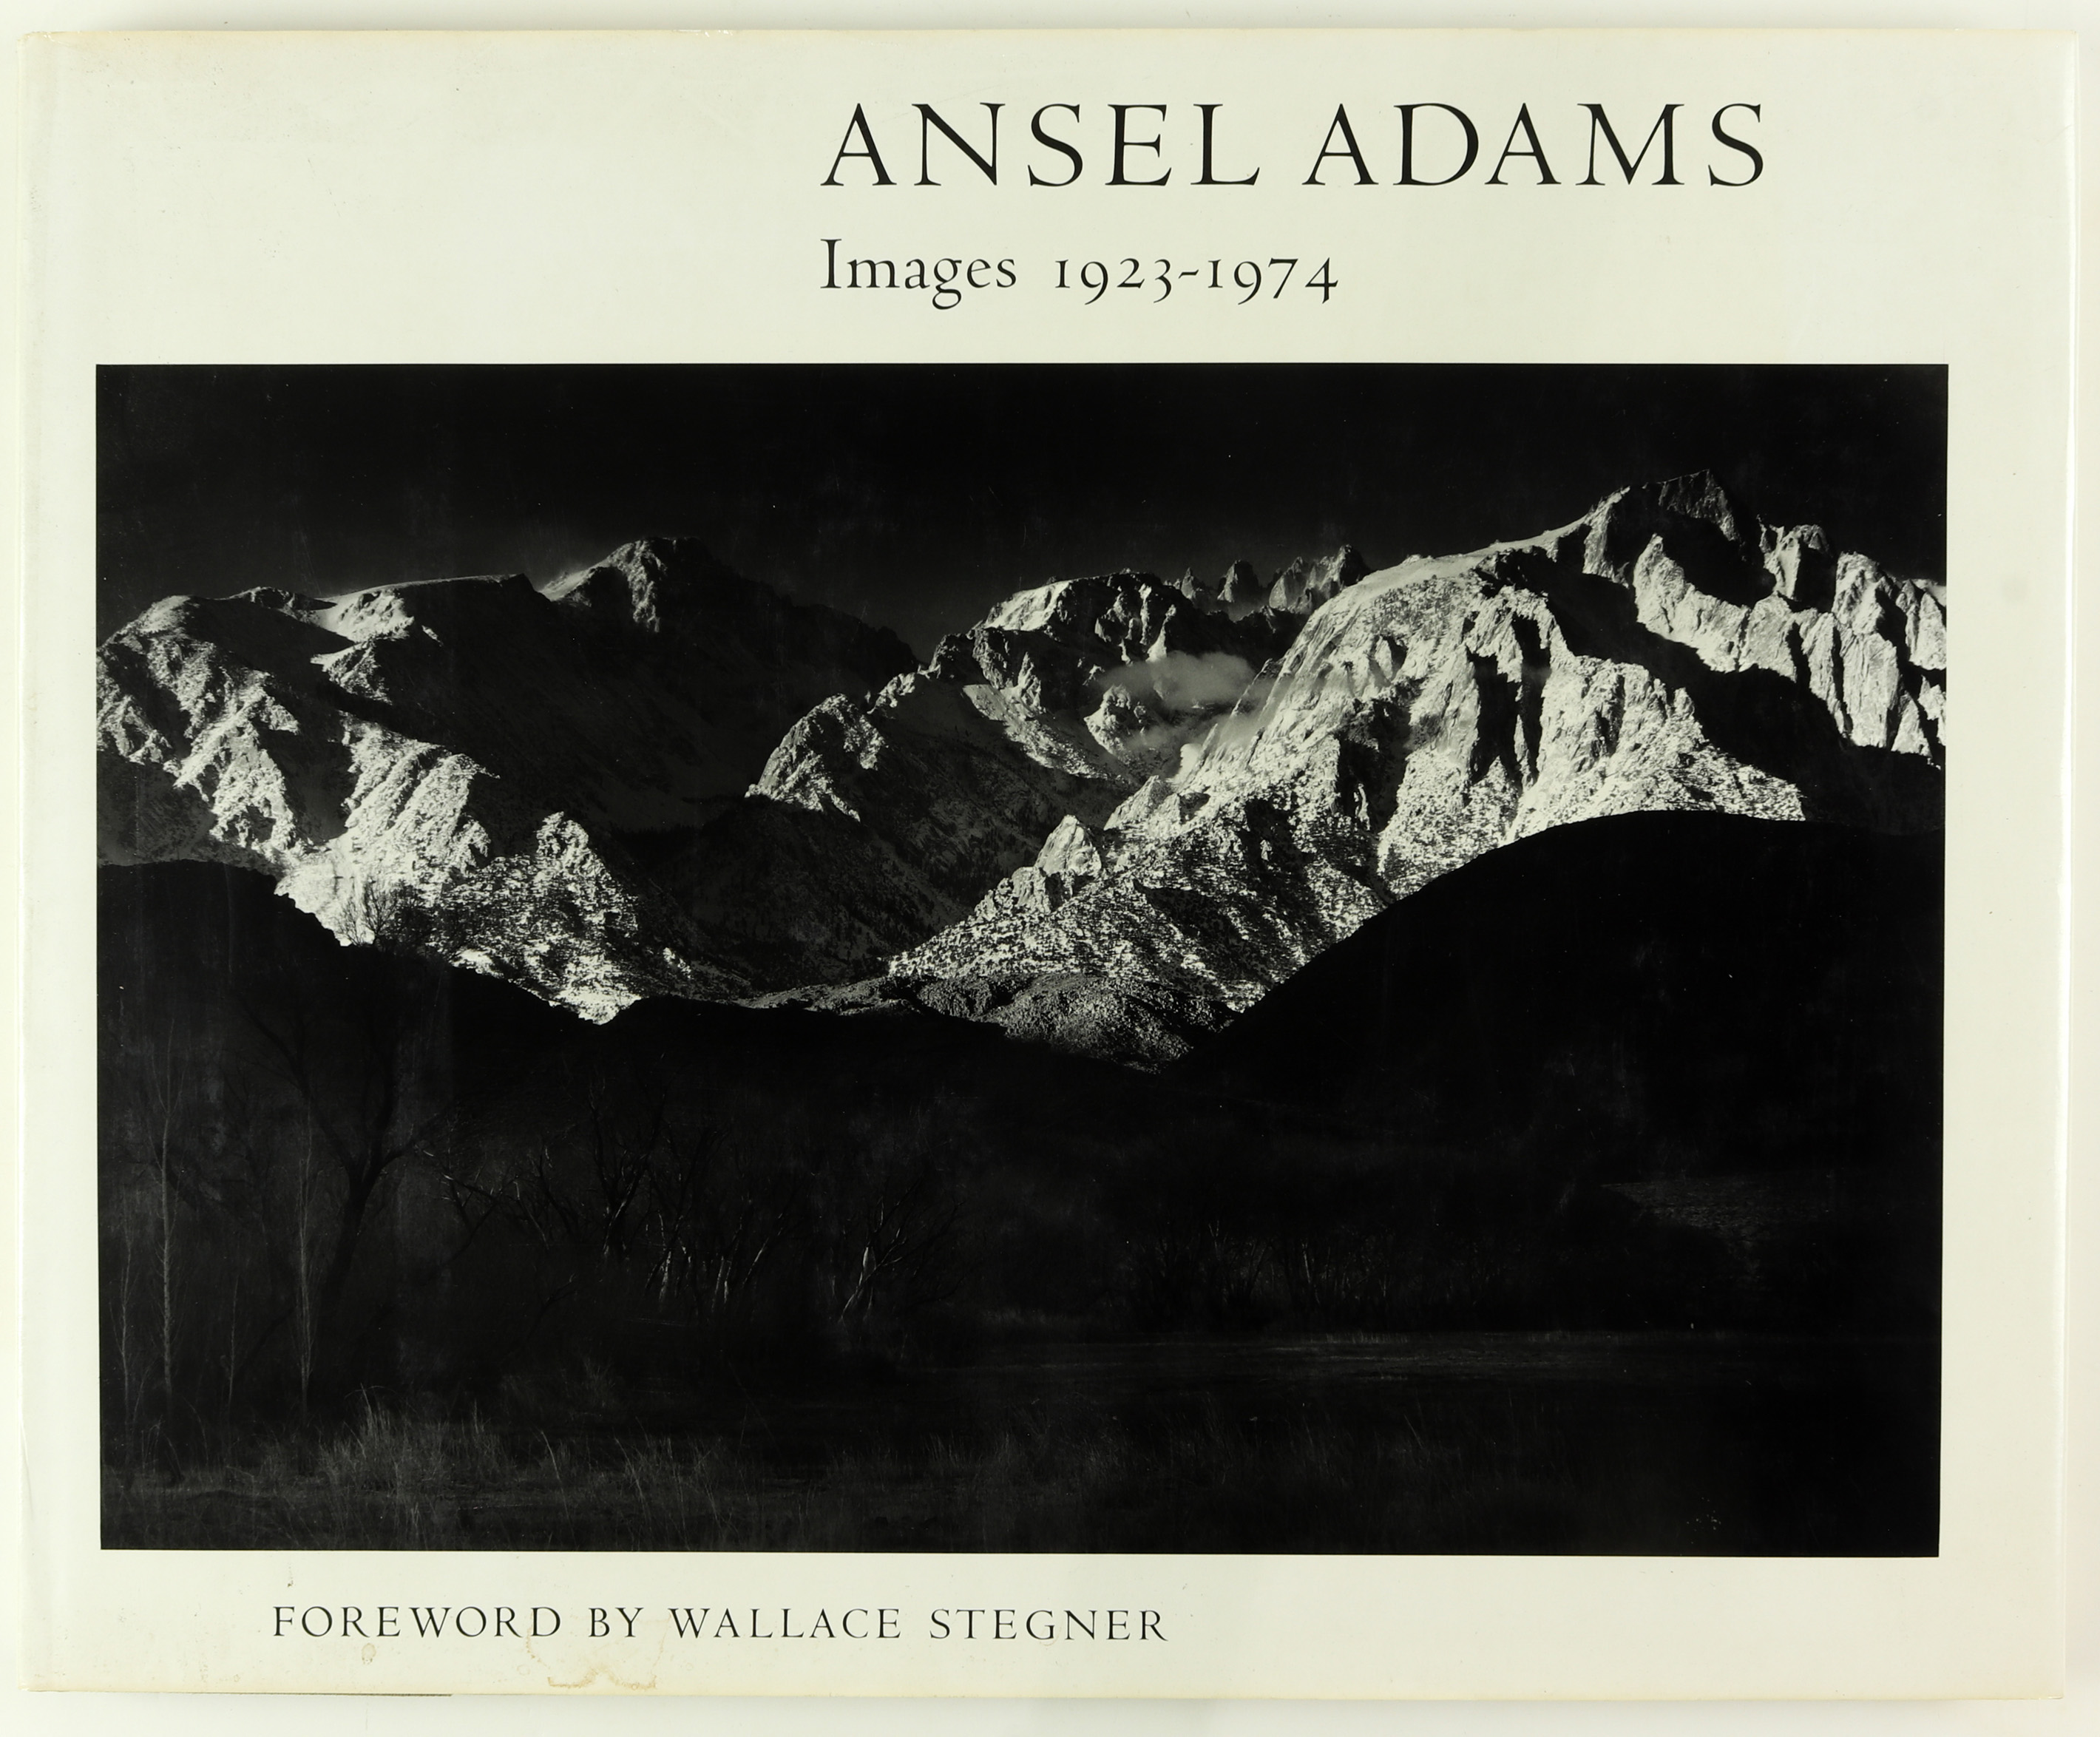 BOOK ANSEL ADAMS IMAGES 1923 1974 3a3613